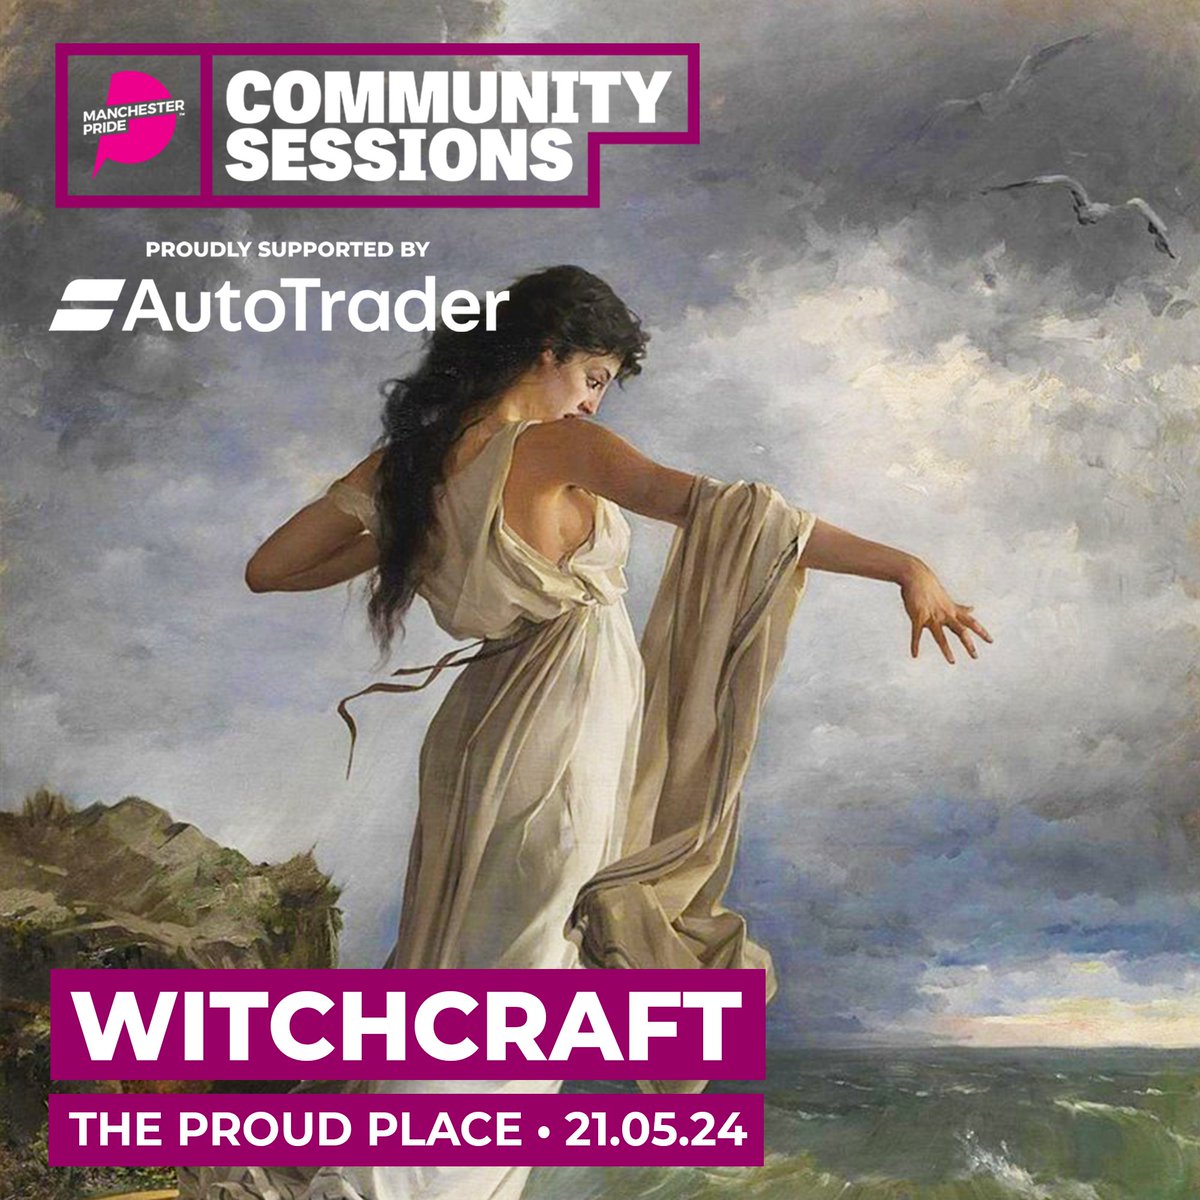 Calling all queer witches! 🖤🏳️‍🌈🏳️‍⚧️ Join us at our next Community Session on 21st May as we discuss all things Witchcraft and teach you how to read Tarot 🔮 Find out more and sign up: eventbrite.co.uk/e/897047562407 ✨